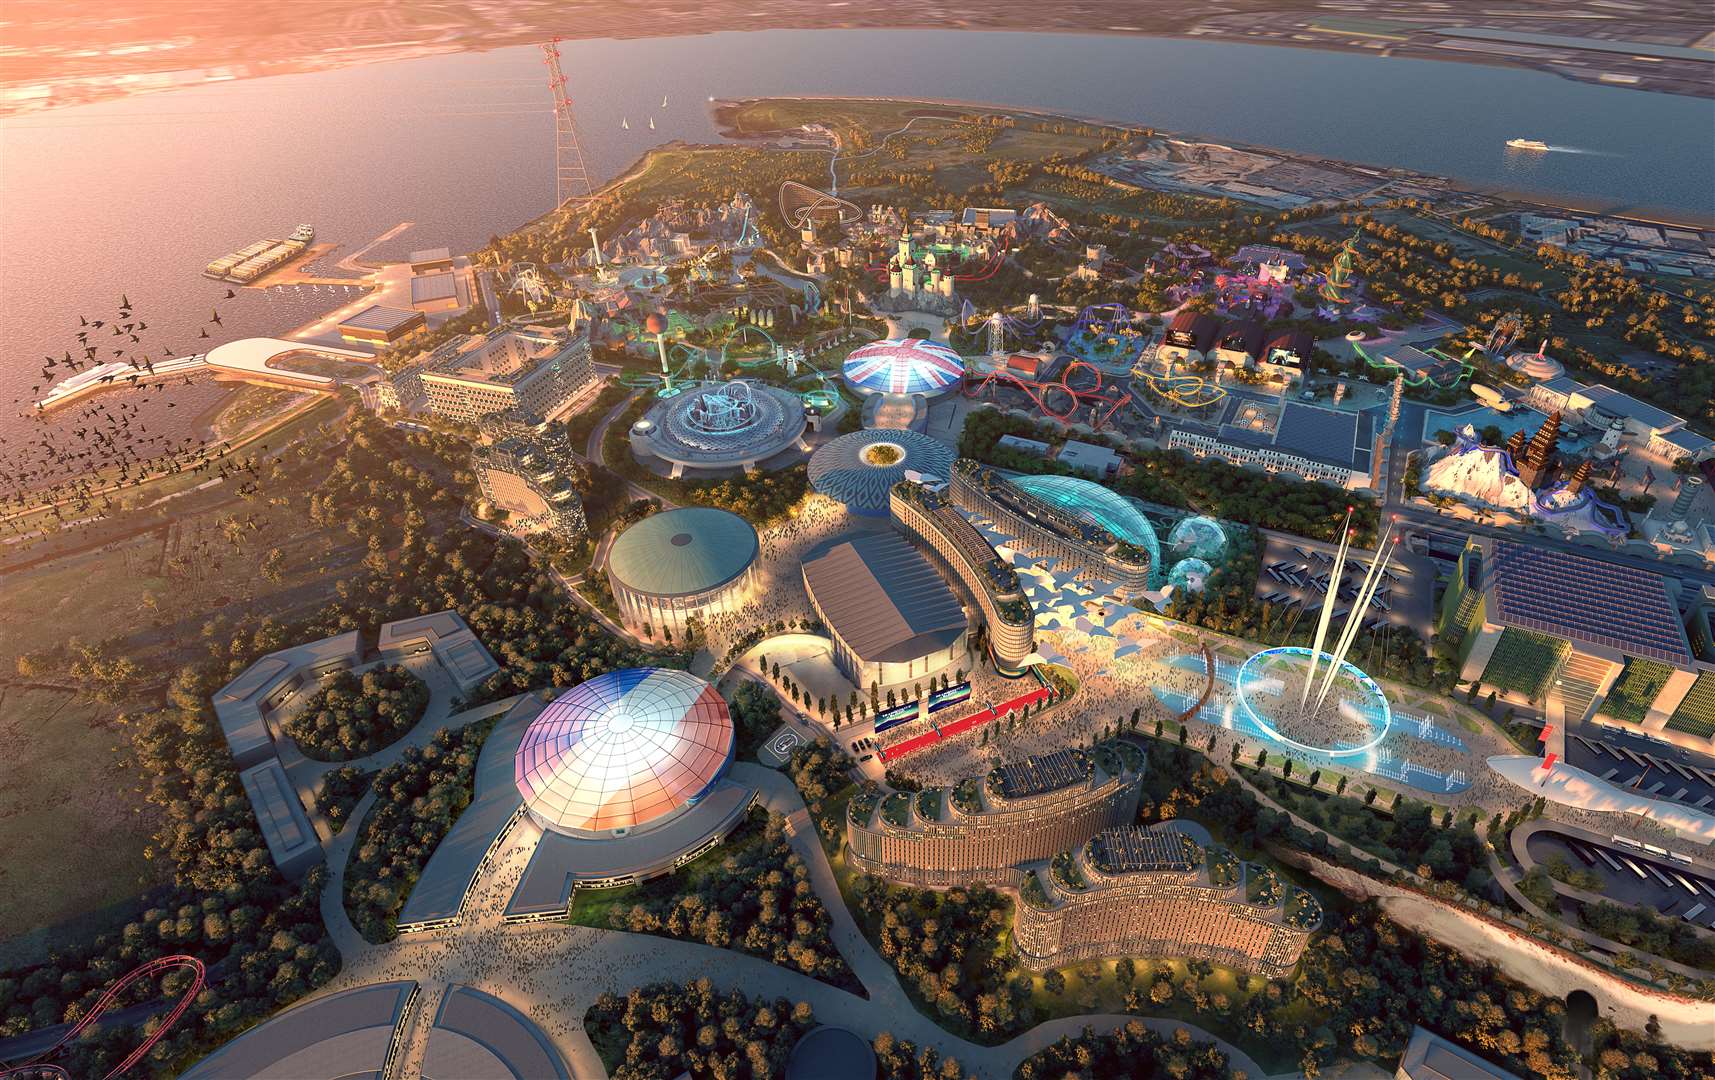 A detailed impression of what the London Resort theme park might look like